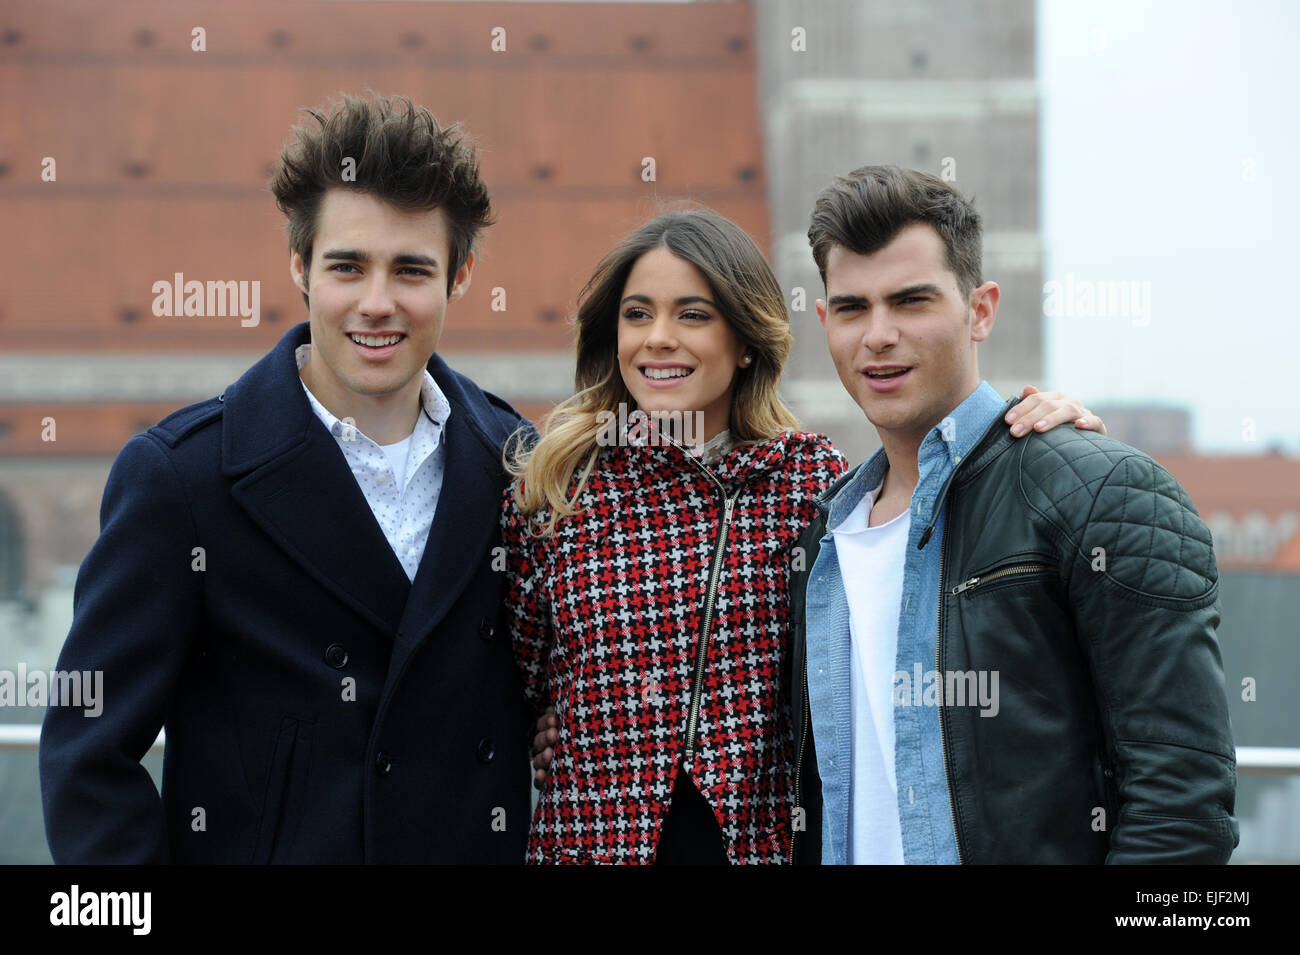 Munich, Germany. 25th Mar, 2015. Actors Jorge Blanco (l-r) (Mexico, as Leon), Martina Stoessel (Argentina, as Violetta) and Diego Dominguez (Spain, as Diego) pose during a press event on the roof of a hotel in Munich, Germany, 25 March 2015. The actors are promoting the new Disney TV show 'Violetta' in Germany. PHOTO: TOBIAS HASE/dpa/Alamy Live News Stock Photo